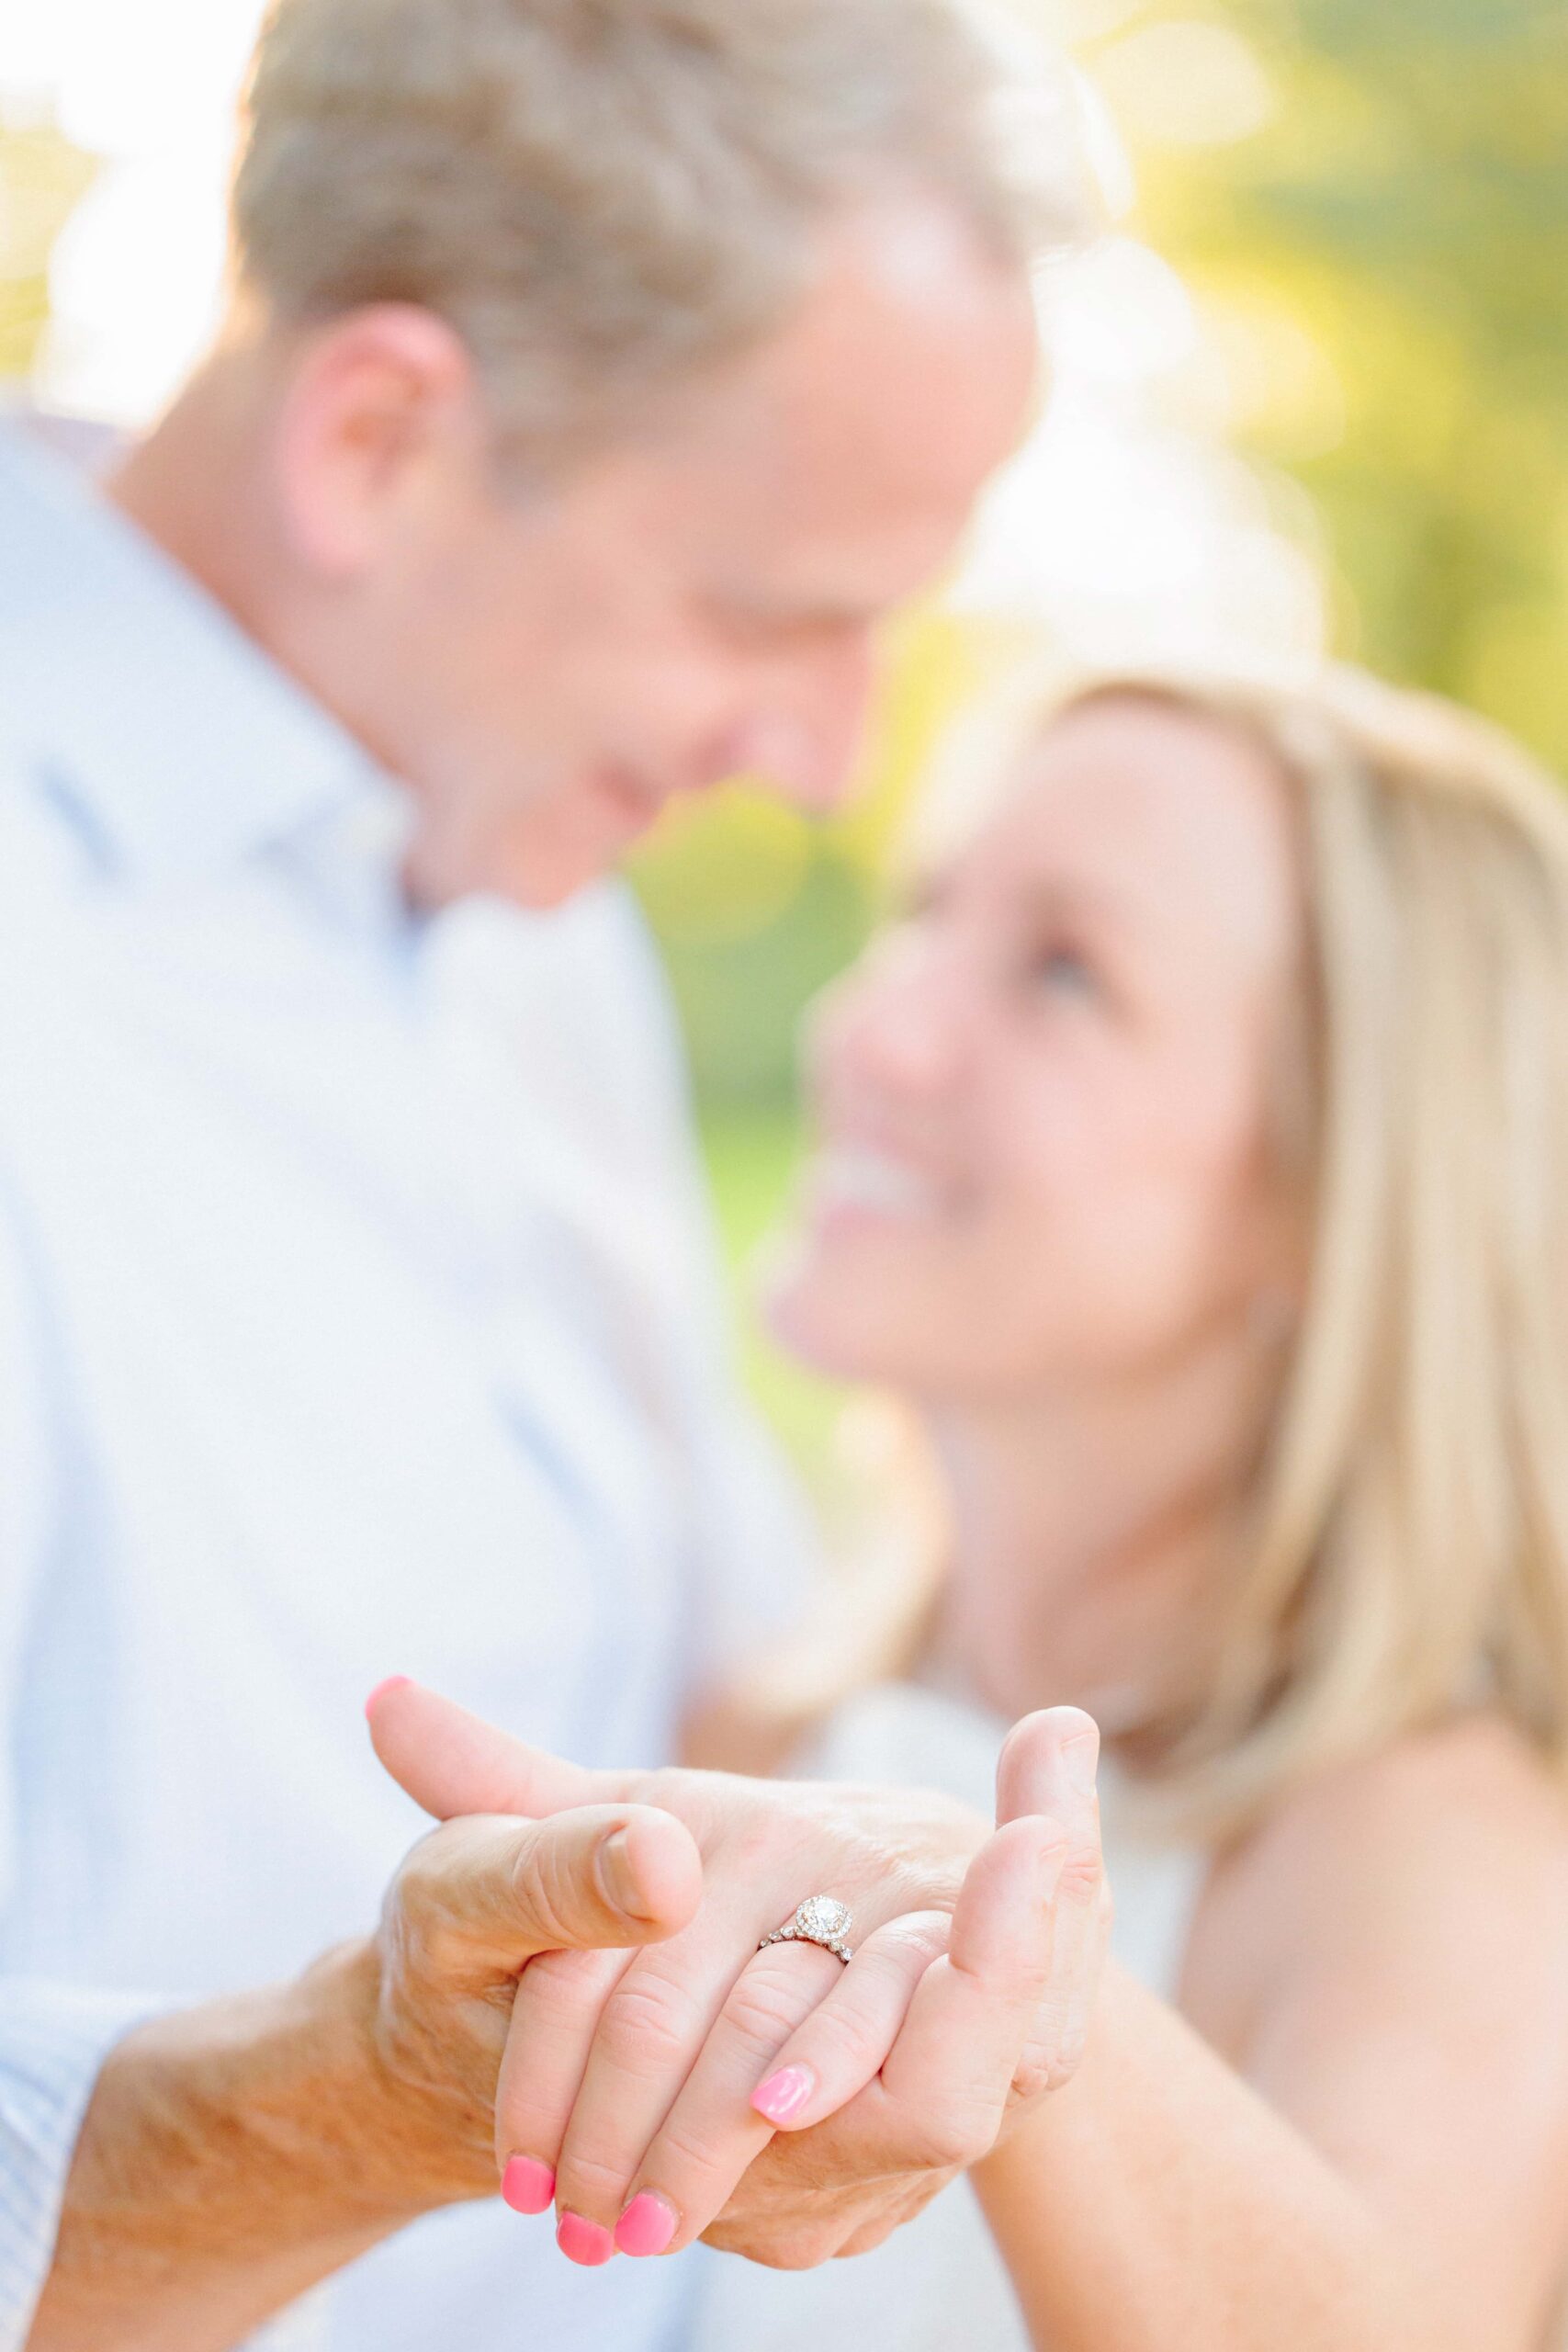 Janet and Matt show off her engagement ring as they dance together for this image at the Rock Hill, SC riverwalk.